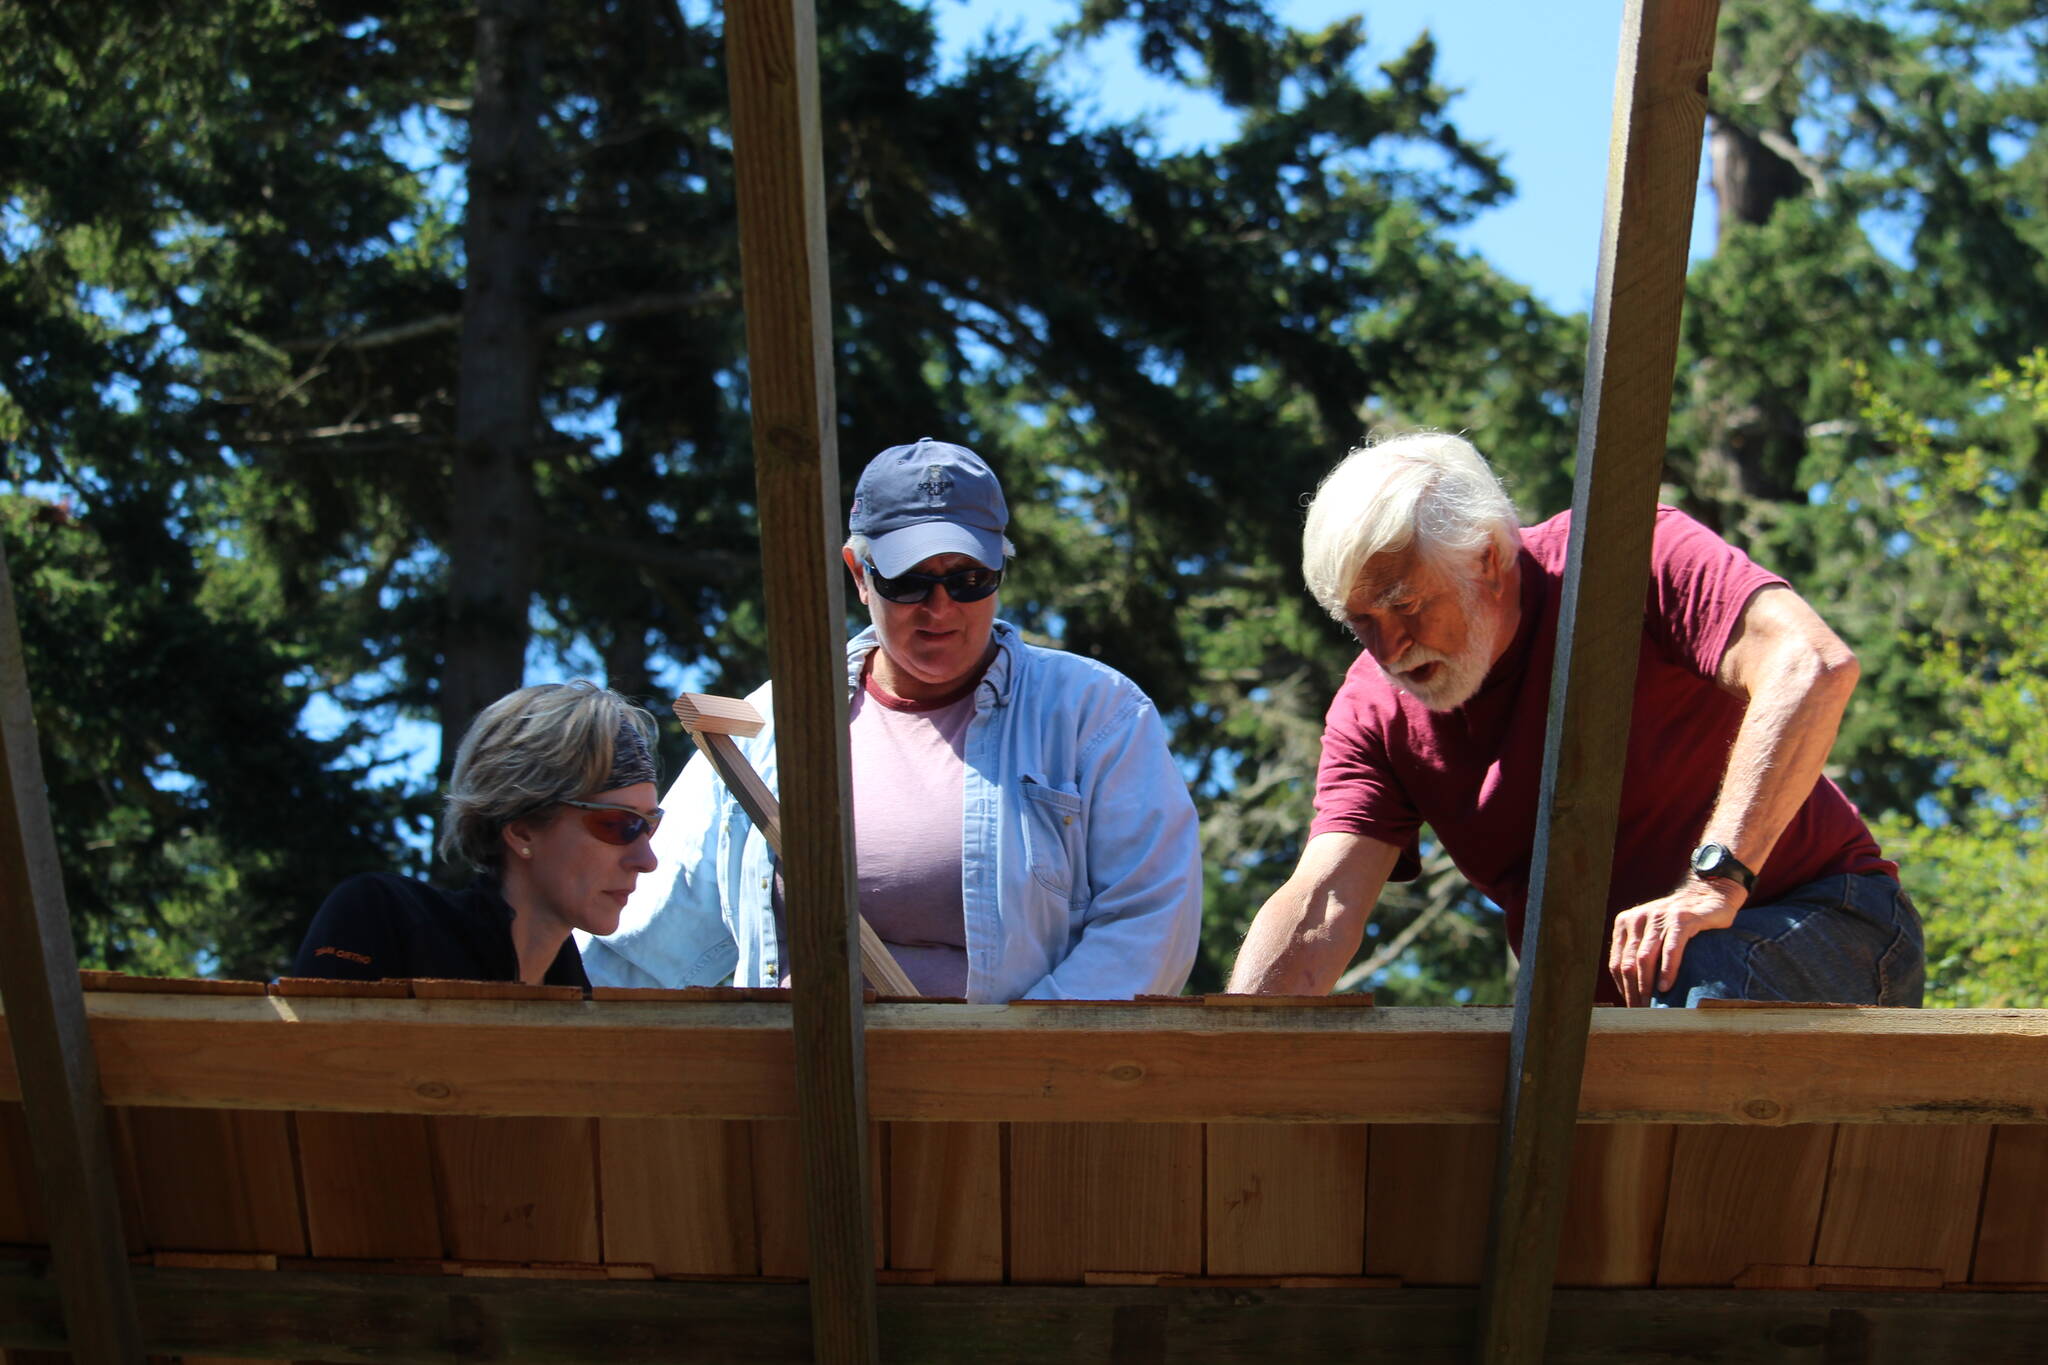 Harrison Goodall, right, works with volunteers on the restoration of the Pratt Machine Shed. (Photo by Karina Andrew/Whidbey News-Times)